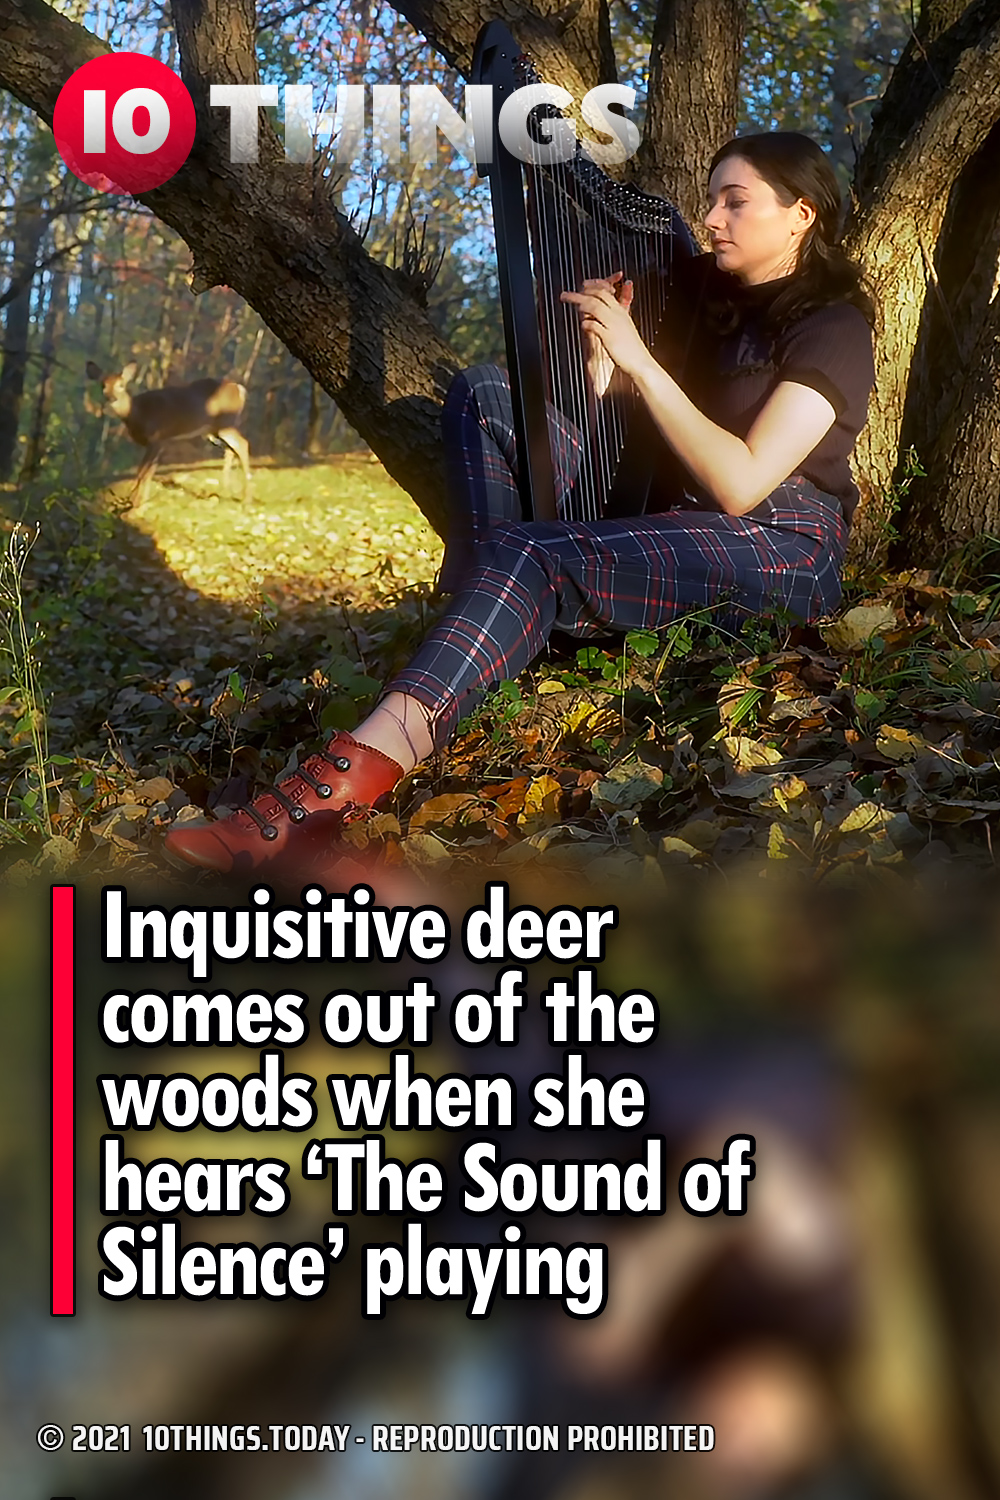 Inquisitive deer comes out of the woods when she hears ‘The Sound of Silence’ playing